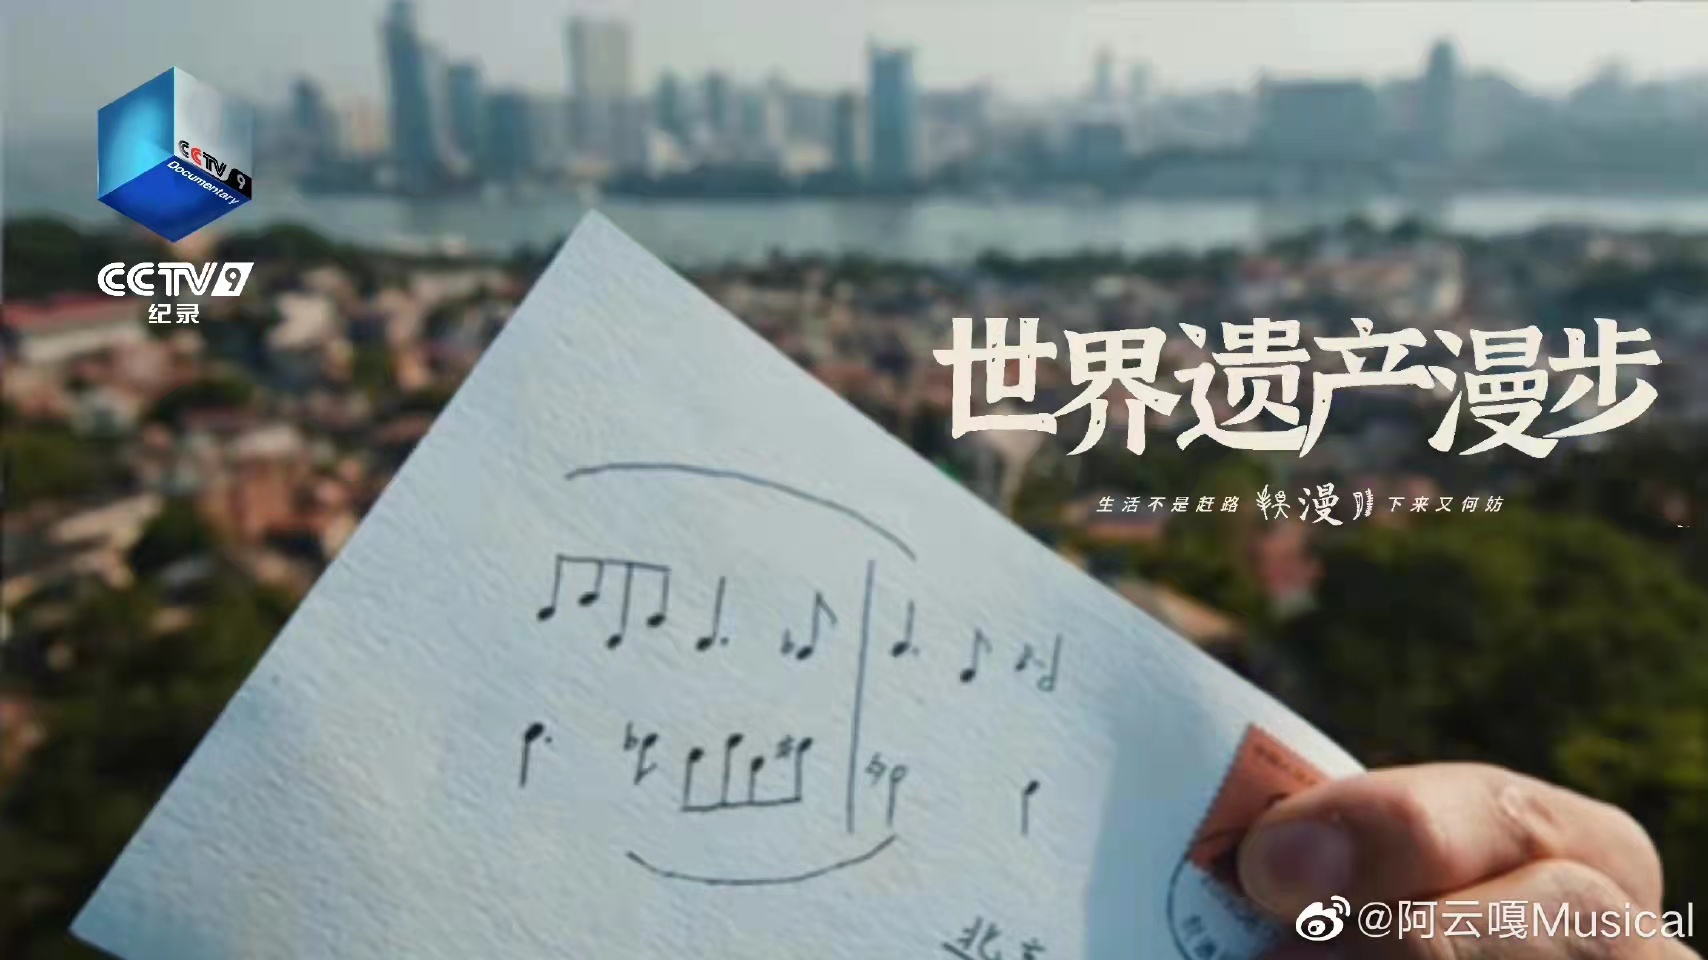 Promotional material of the documentary Immersed with the World Heritage. Photo: Sina Weibo